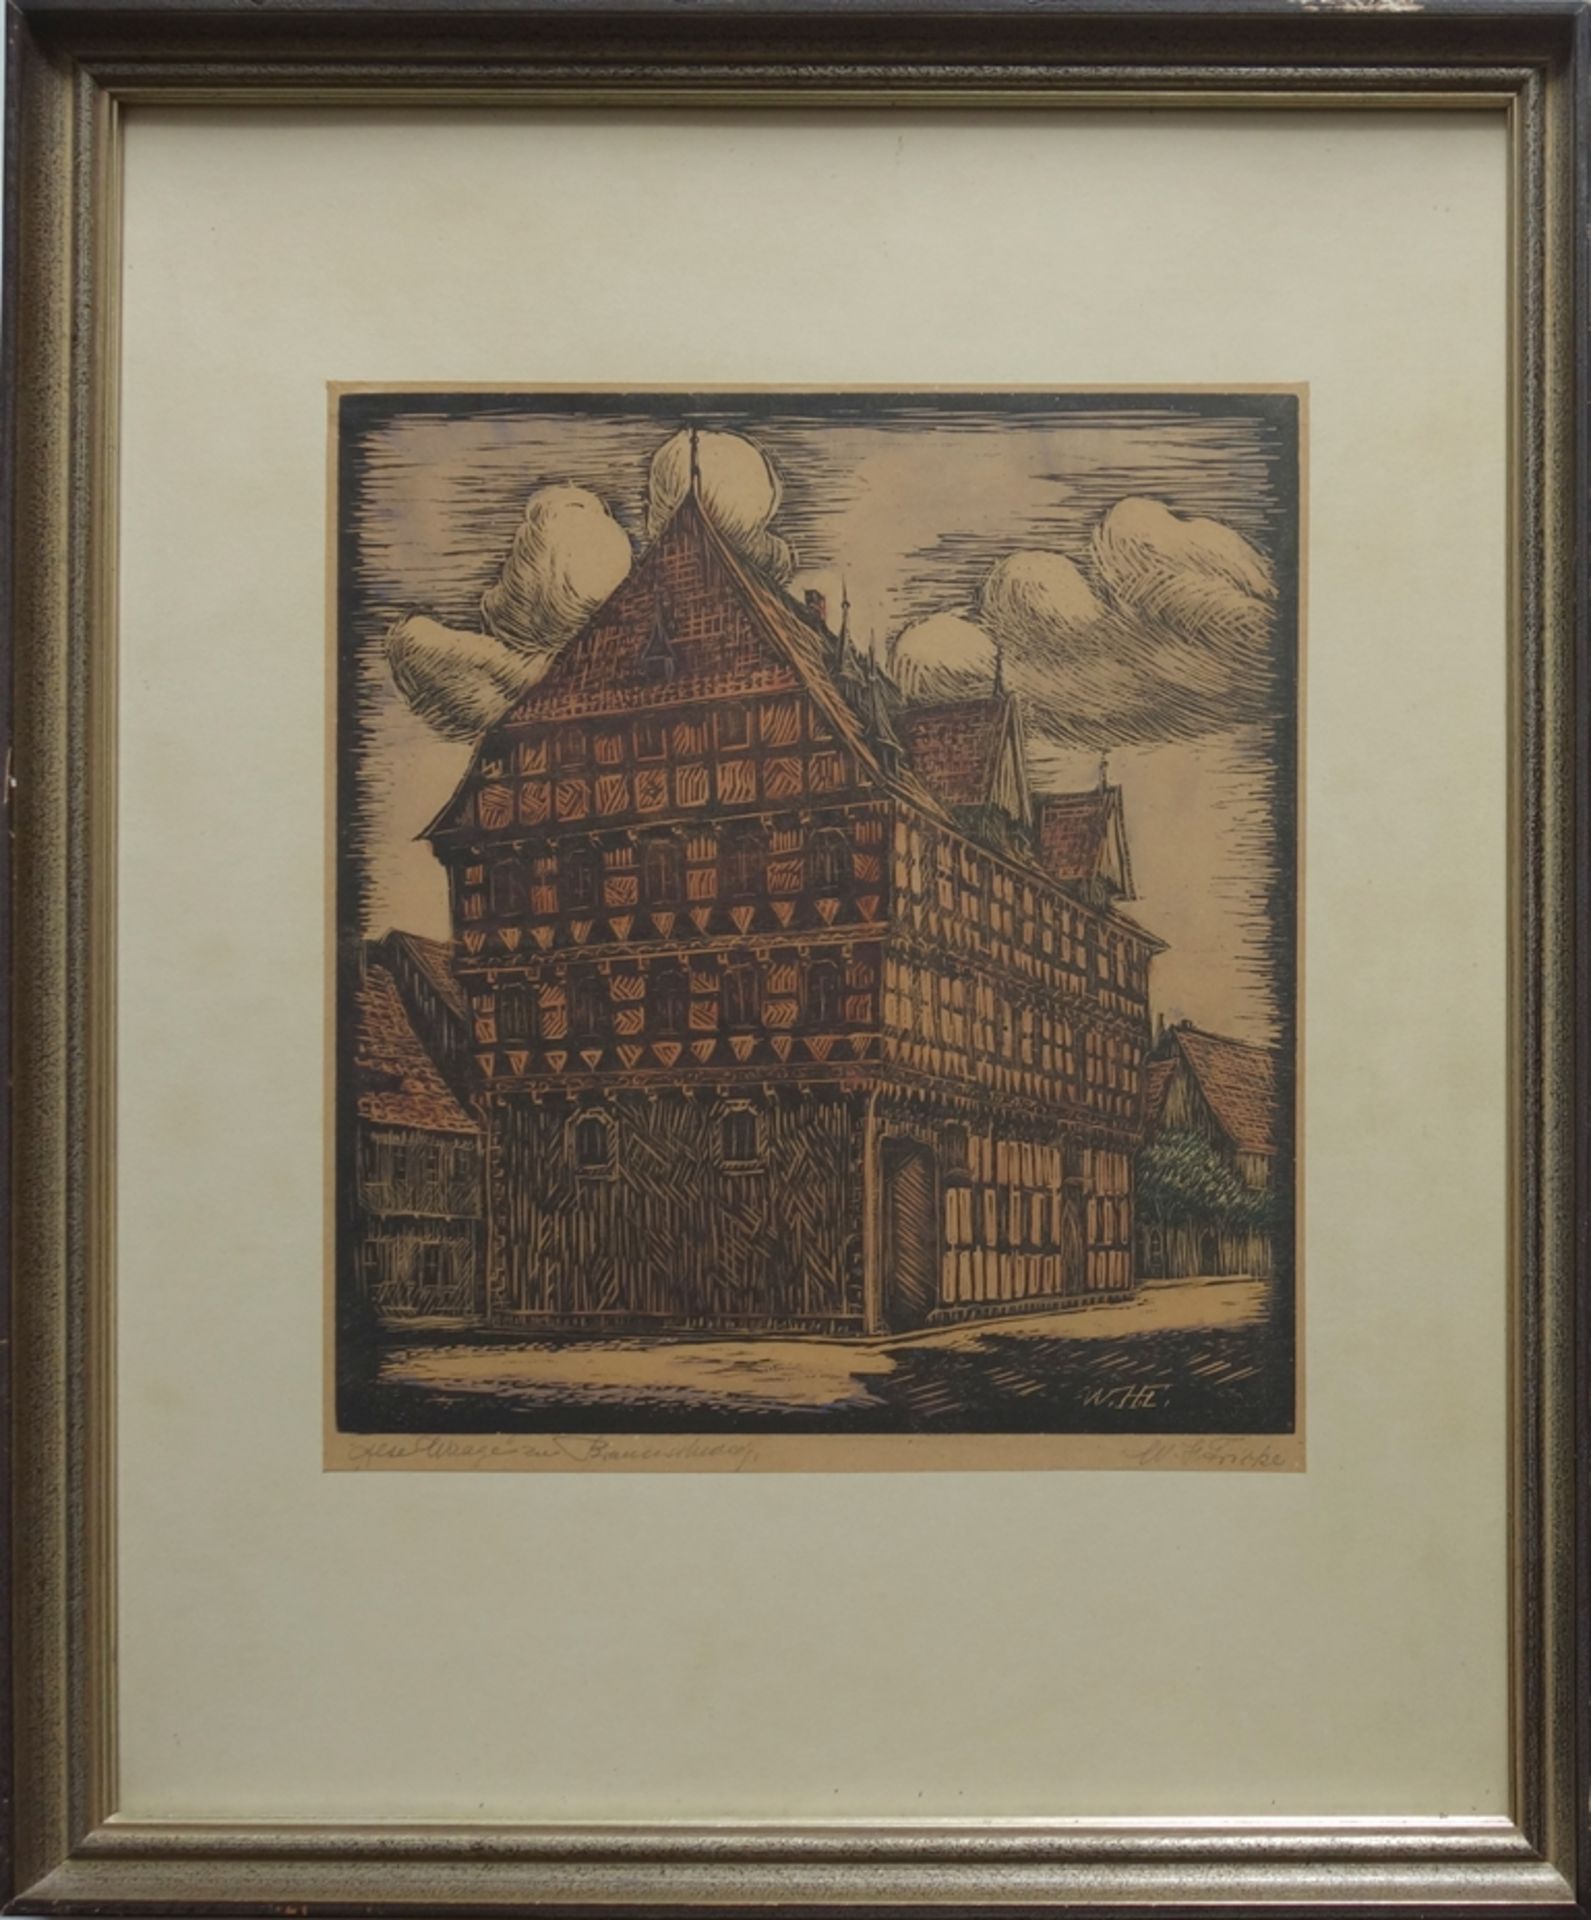 illegibly signed "Alte Waage zu Braunschweig", 1st half of the 20th century, coloured woodcut - Image 2 of 3